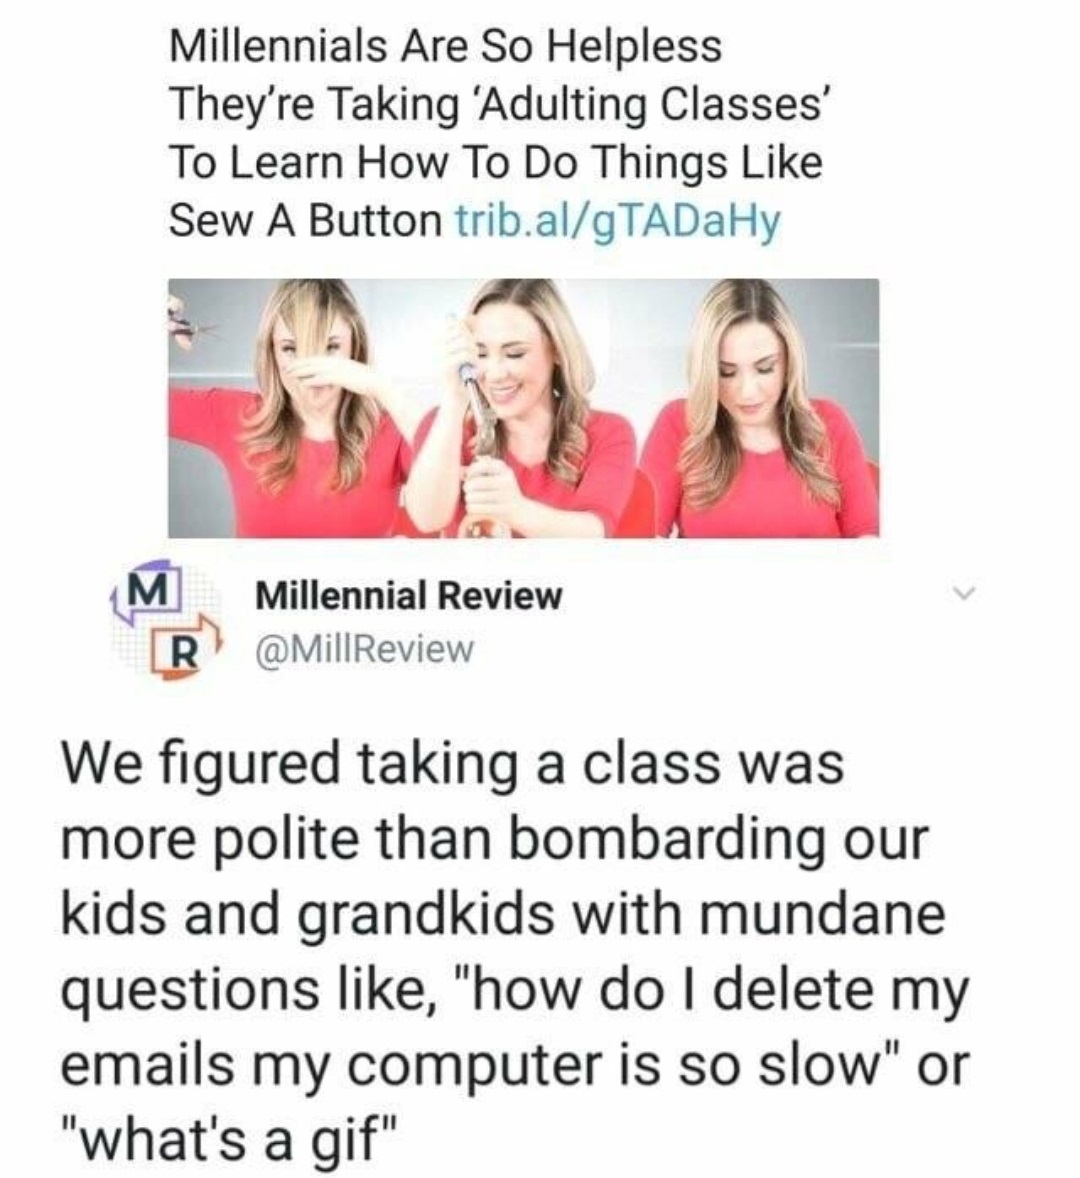 scion what moves you - Millennials Are So Helpless They're Taking 'Adulting Classes' To Learn How To Do Things Sew A Button trib.algTADaHy Millennial Review R We figured taking a class was more polite than bombarding our kids and grandkids with mundane qu